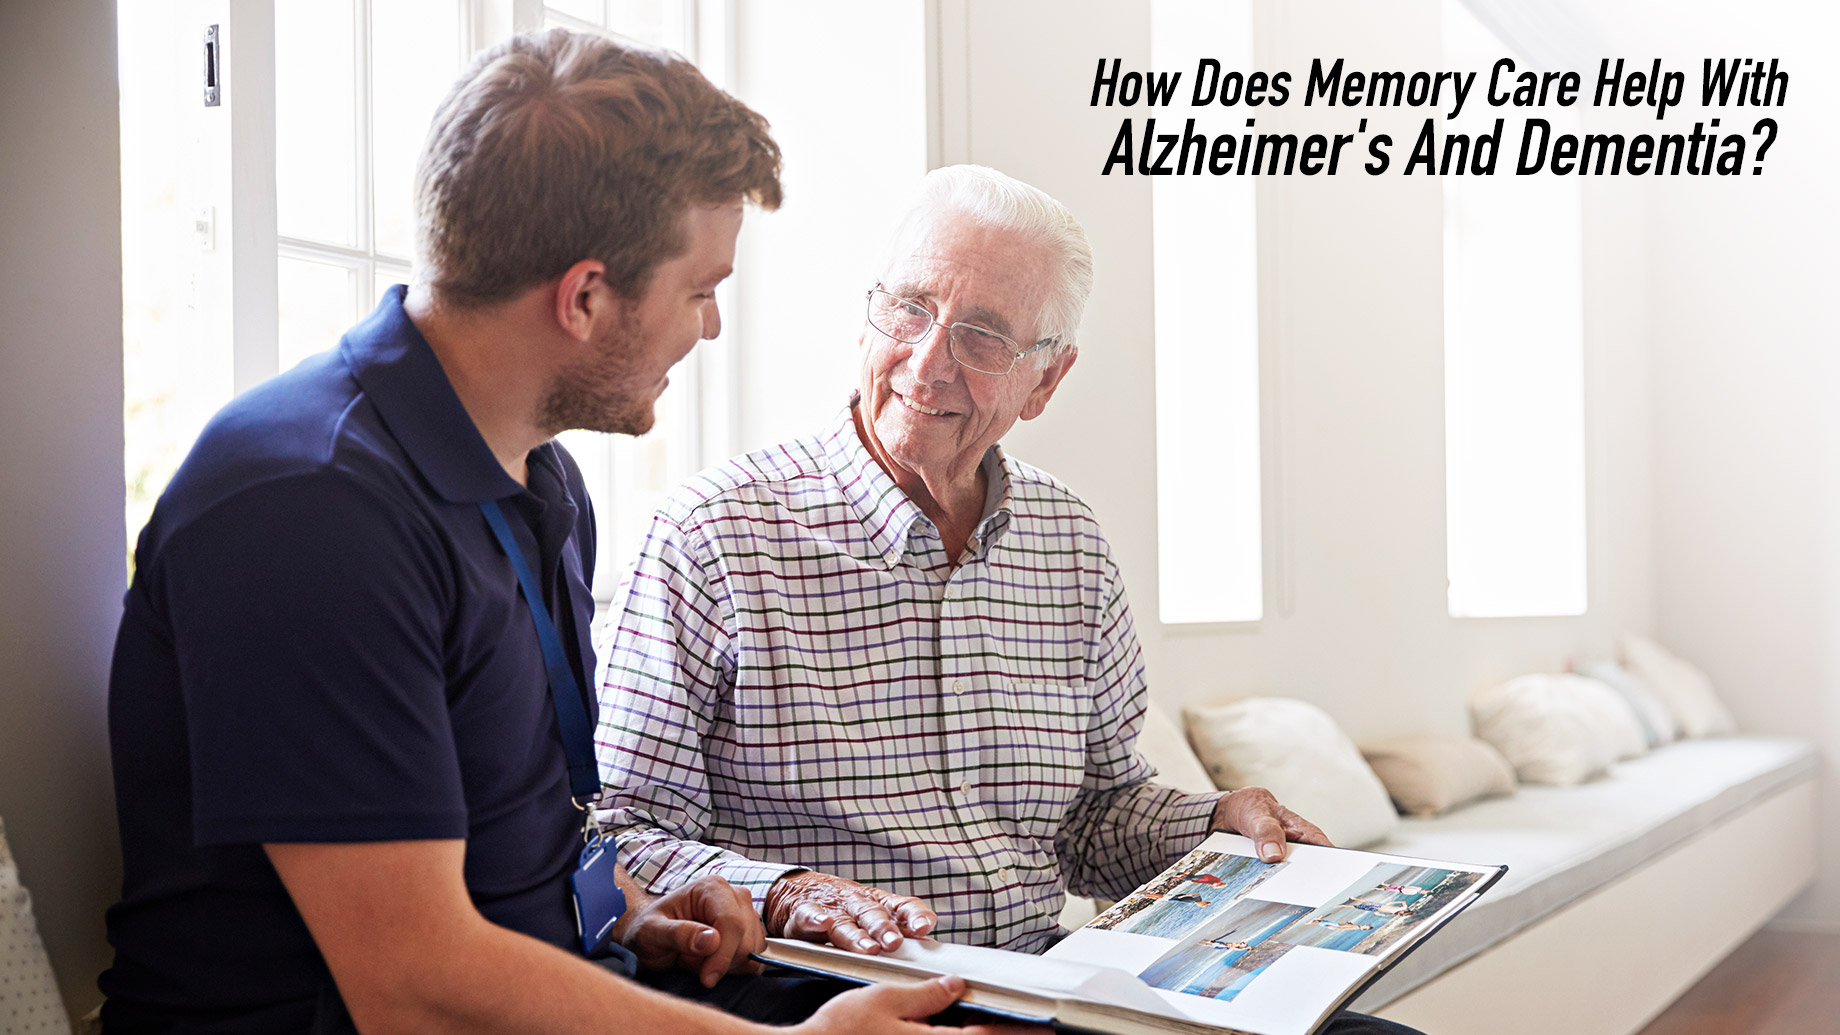 How Does Memory Care Help With Alzheimer's And Dementia?